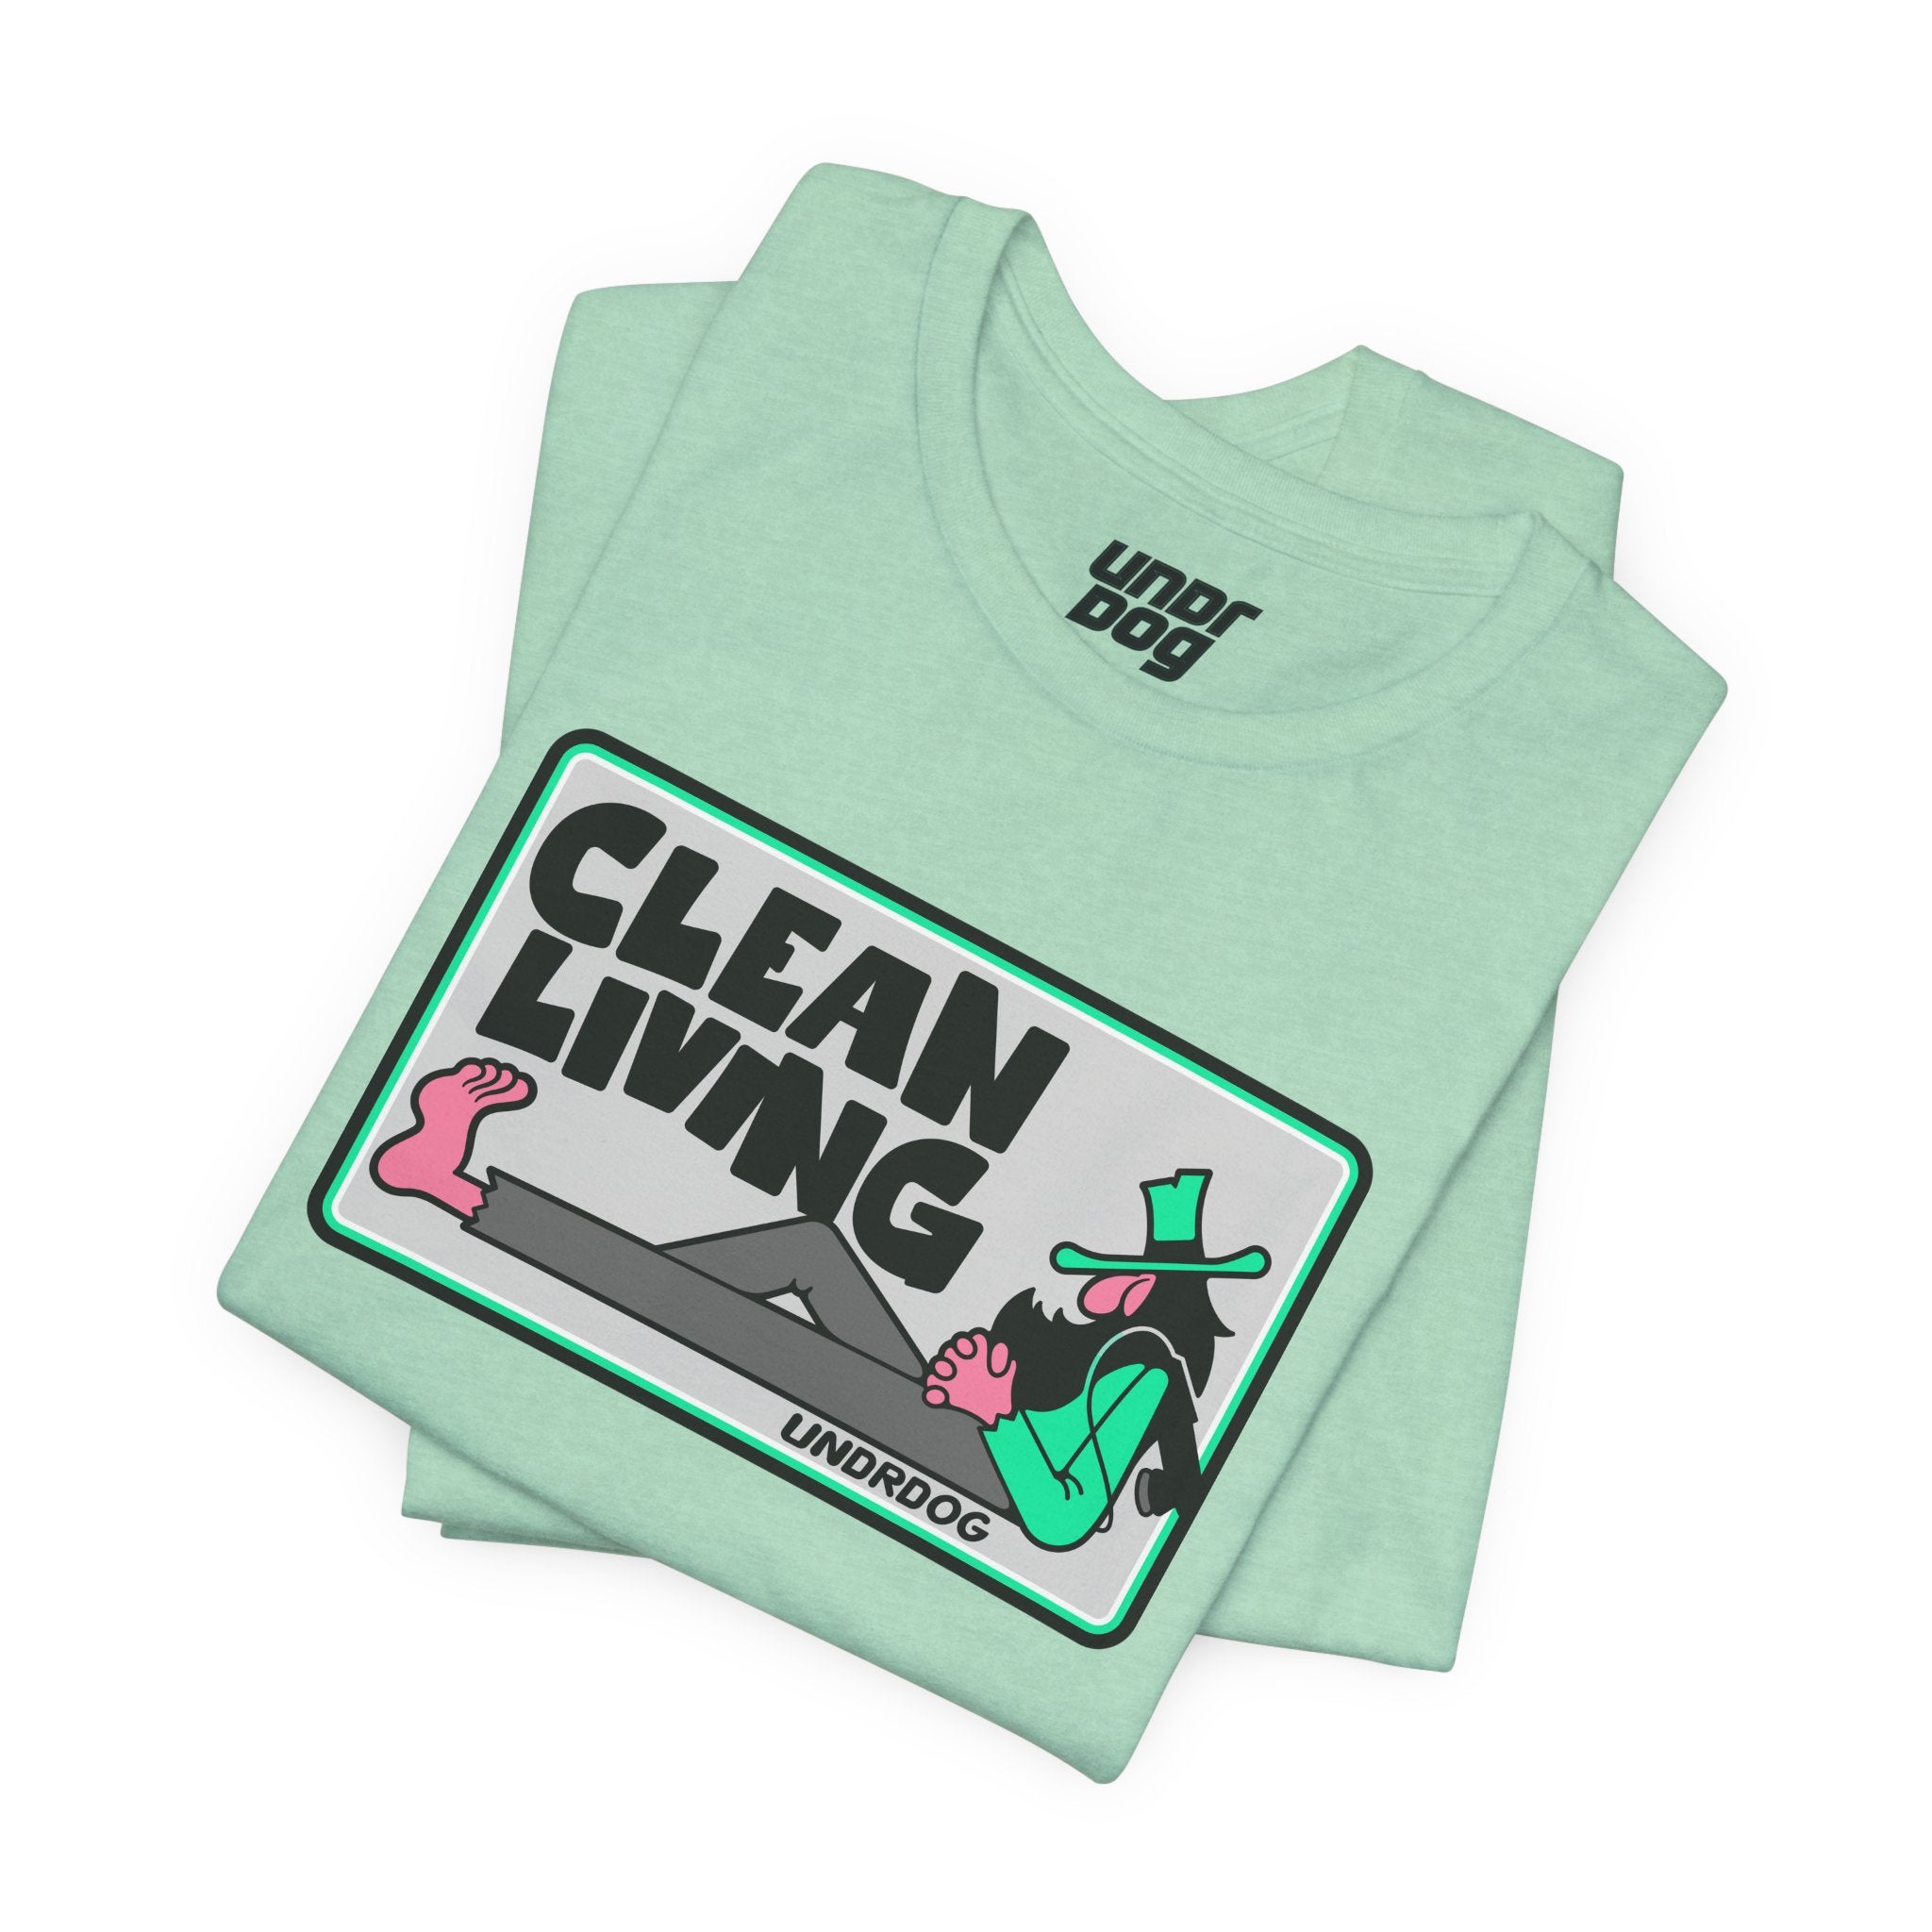 14525827136519223374_2048.jpg - Clean Living v2 by Undrdog Tee - Undrdog Surface Products